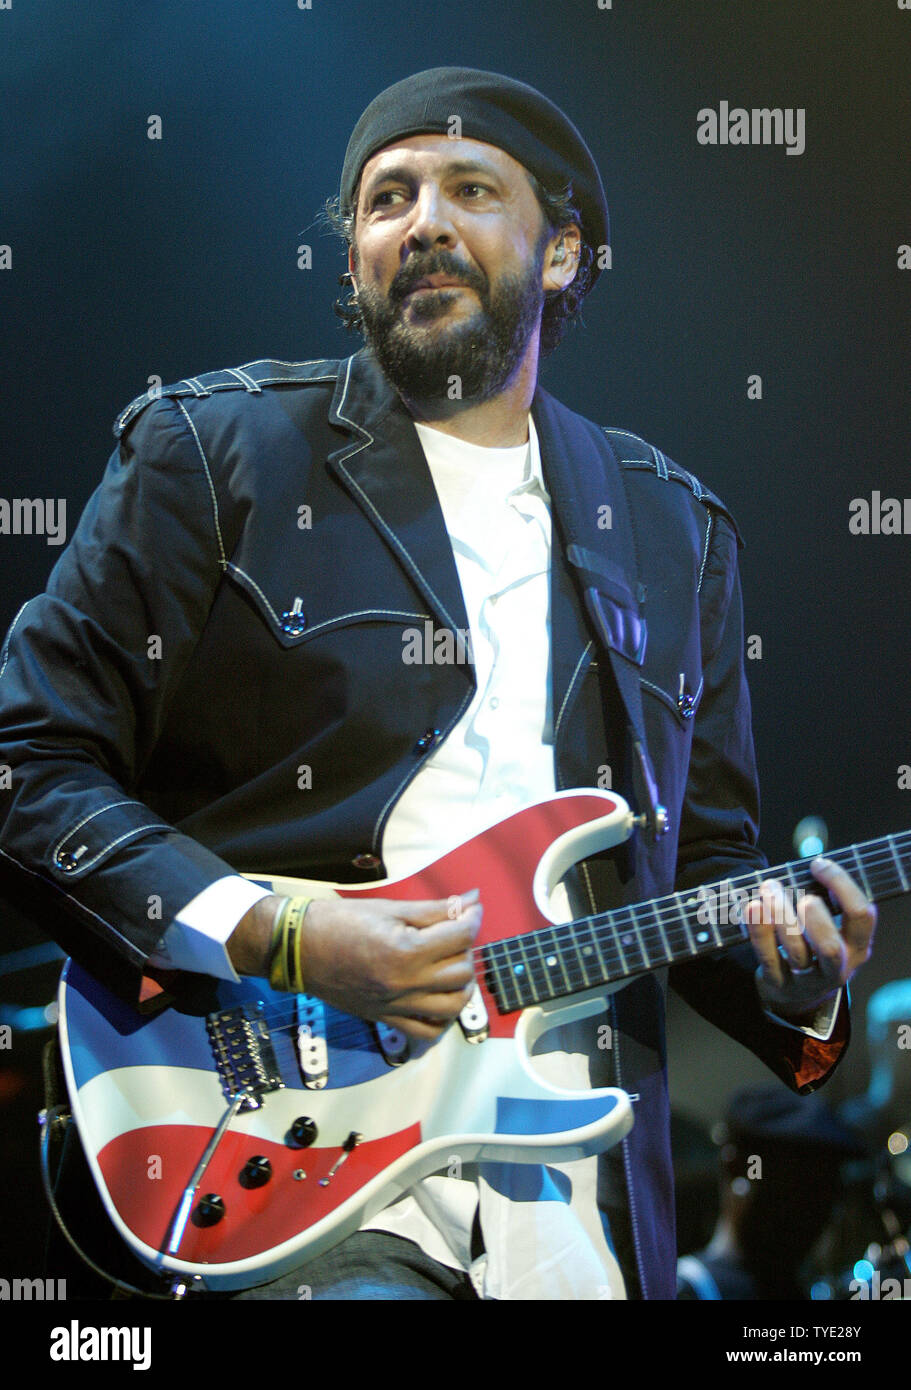 Dominican salsa artist Juan Luis Guerra performs in concert at the Seminole Hard Rock Hotel and Casino in Hollywood, Florida on June 26, 2009. (UPI Photo/Michael Bush) Stock Photo